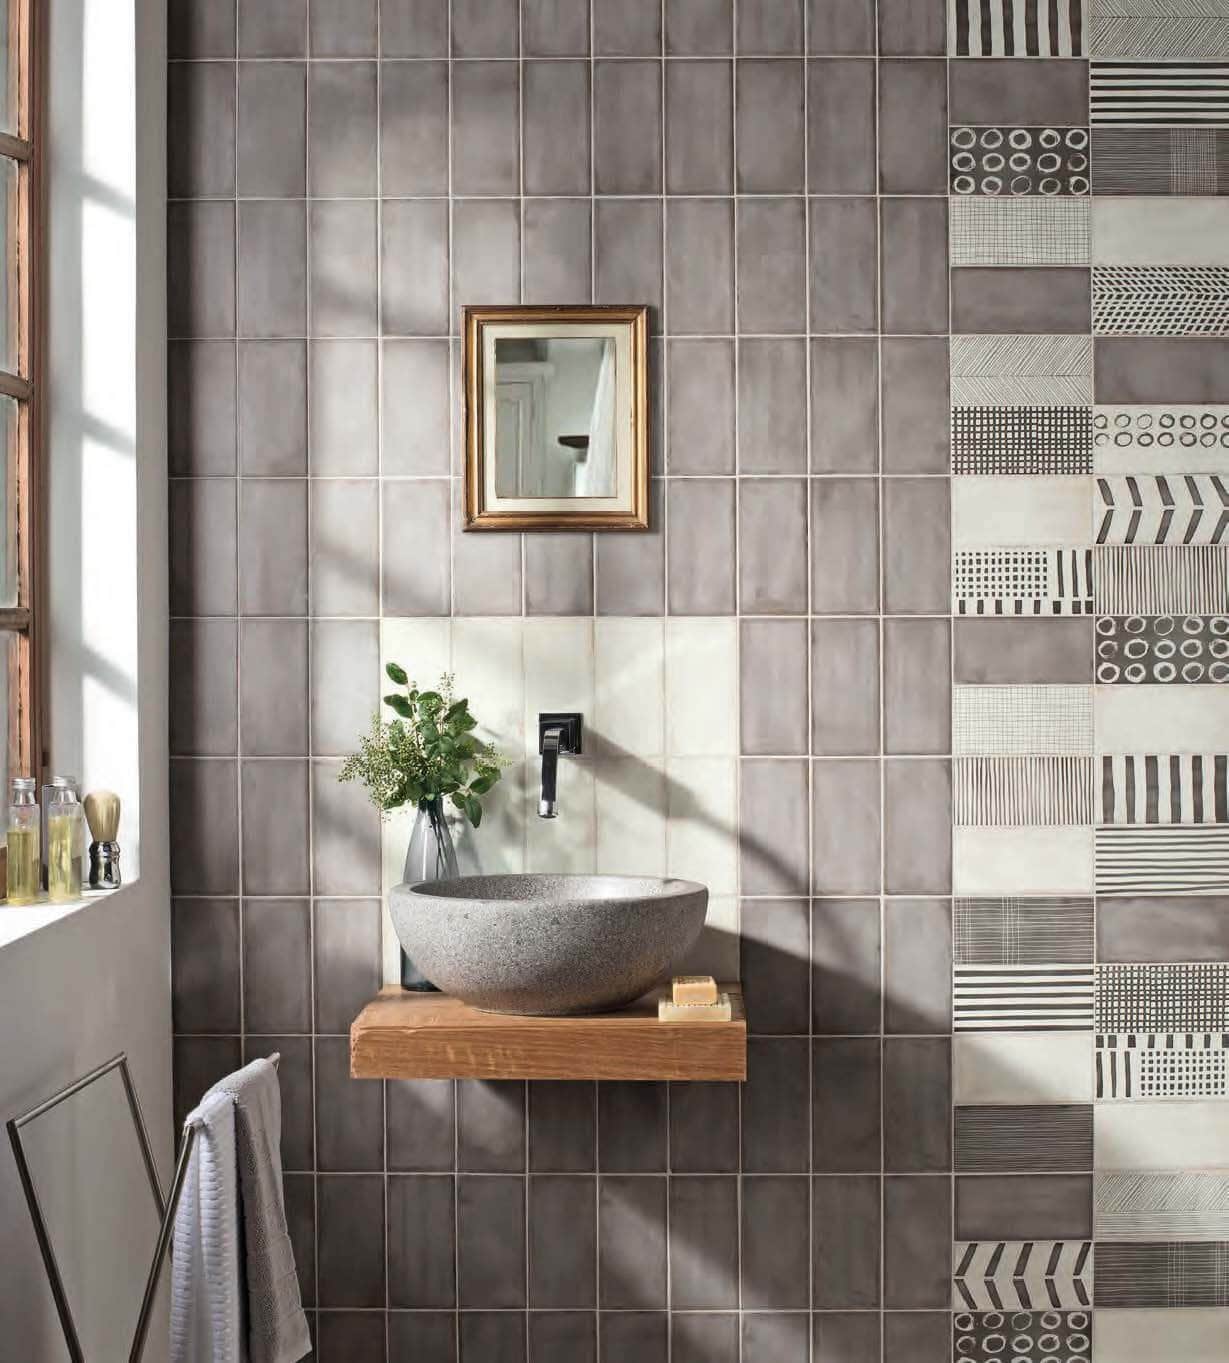 Bathroom with variegated and patterned gray tile wall